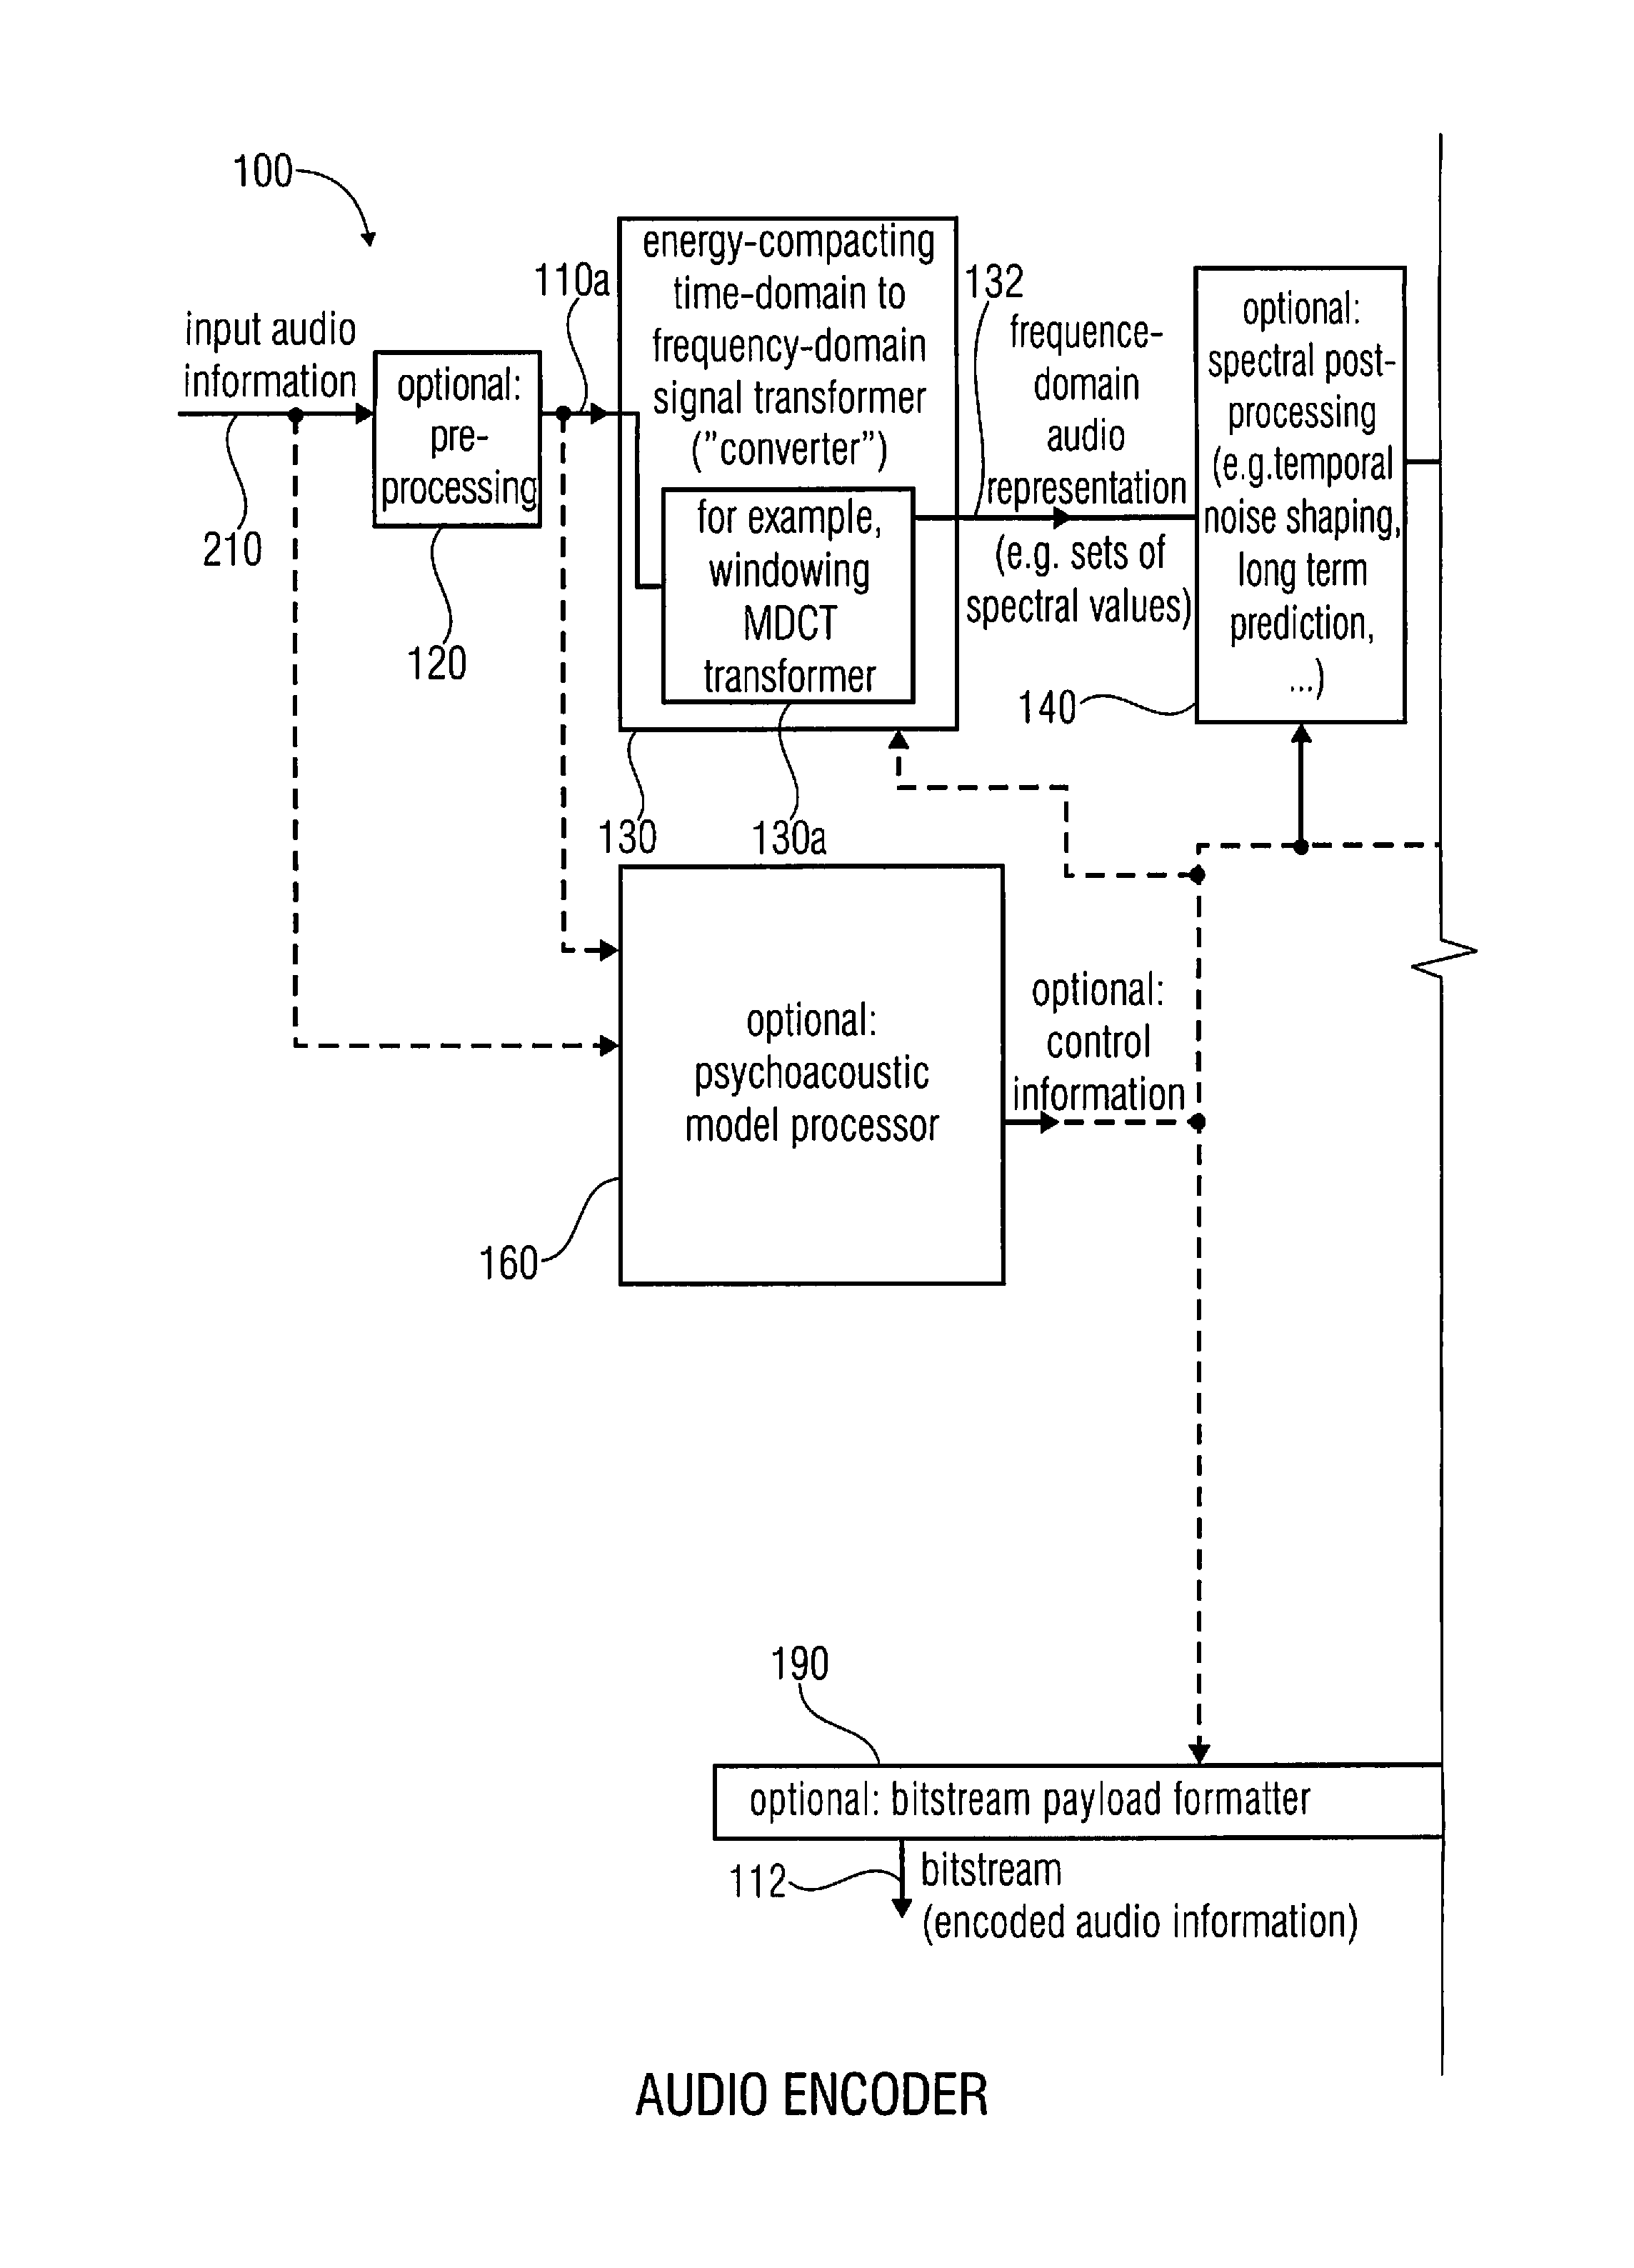 Audio encoder, audio decoder, method for encoding an audio information, method for decoding an audio information and computer program using a detection of a group of previously-decoded spectral values